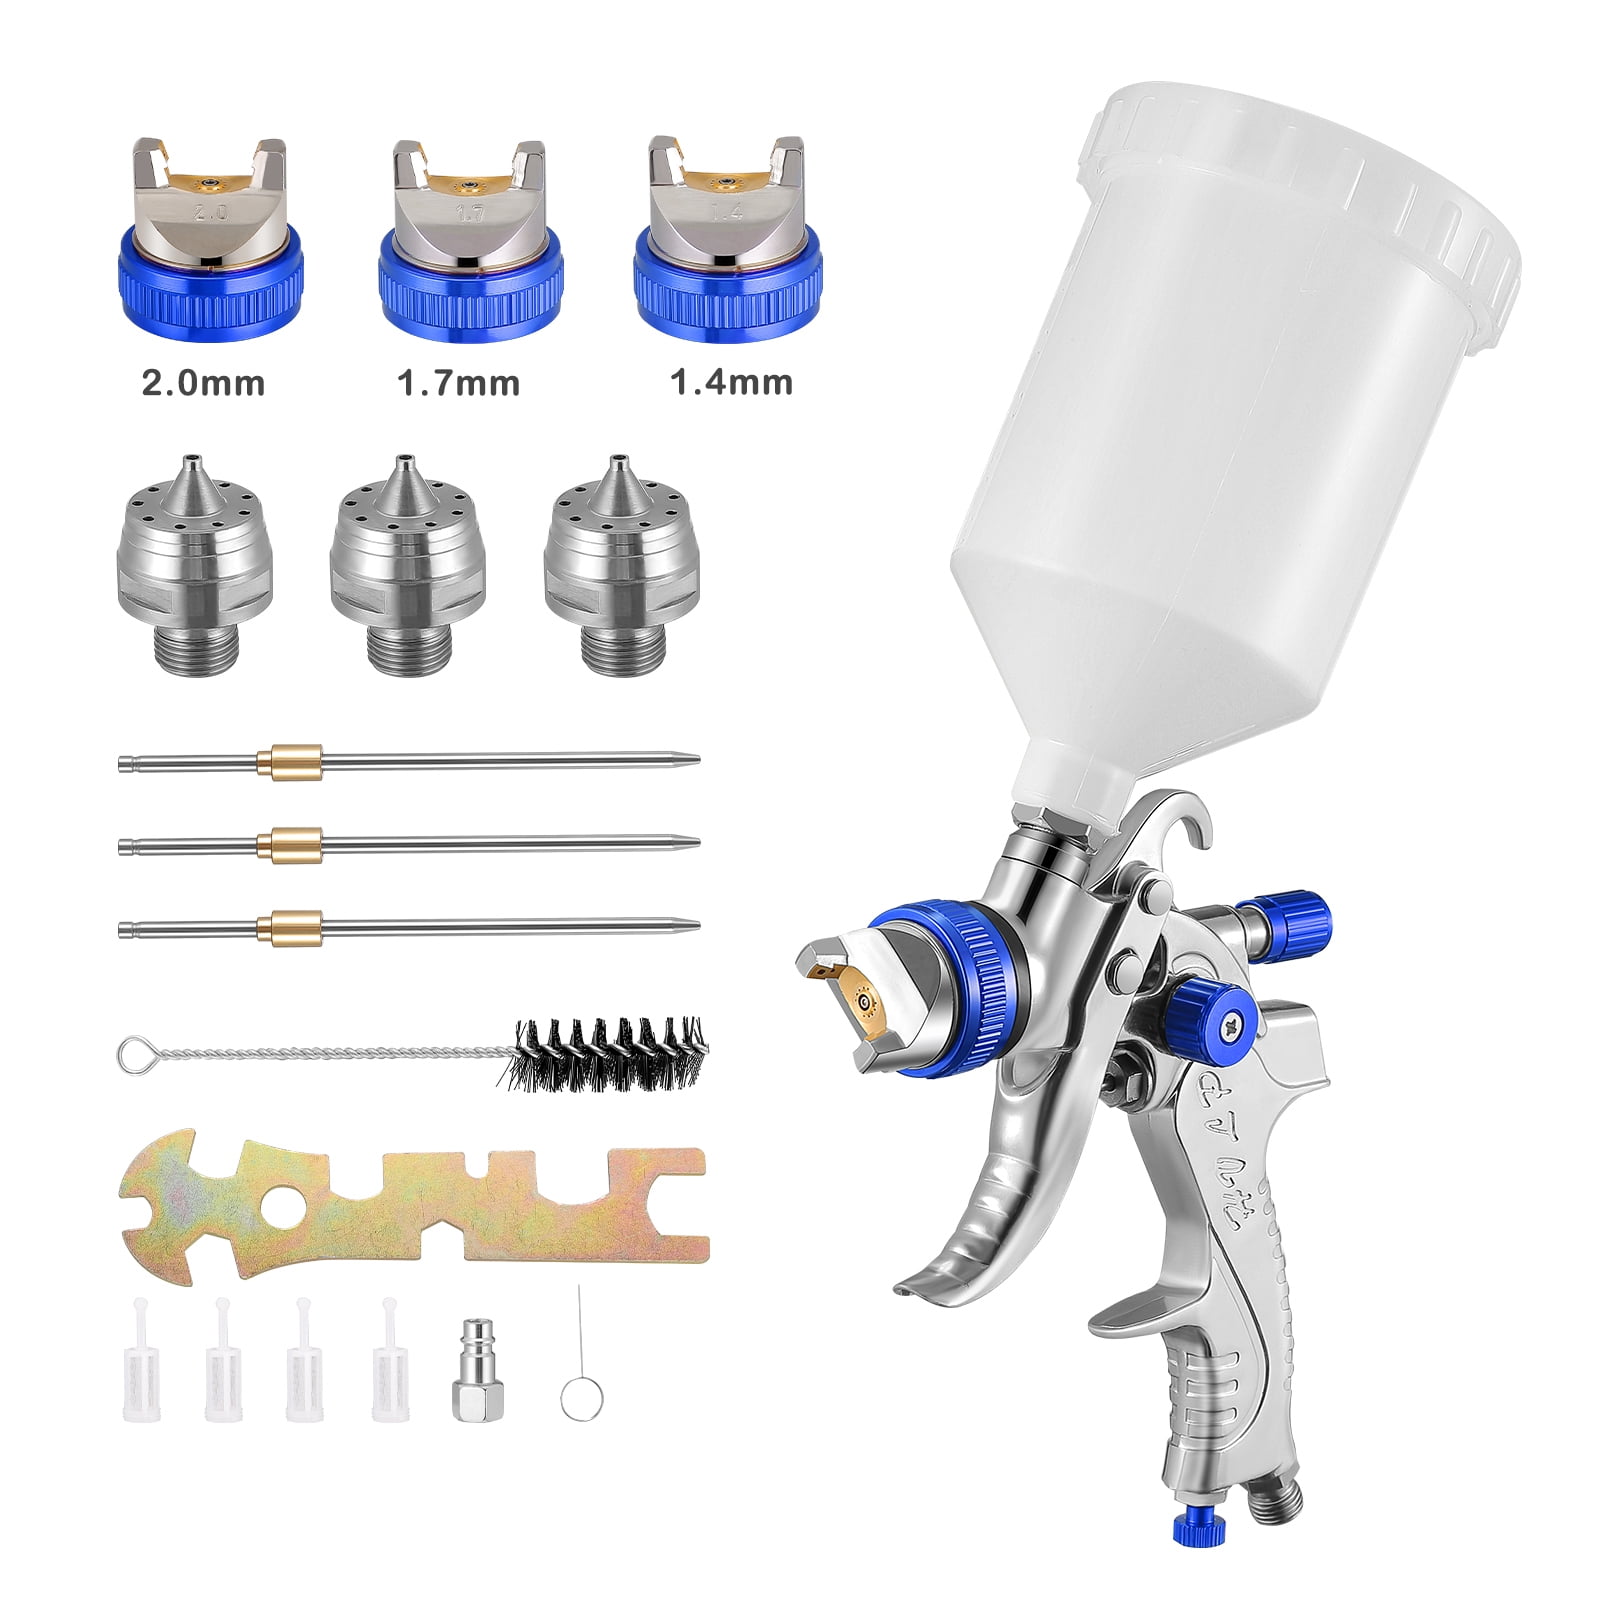 HVLP Spray Gun Kit for painting cars with 1.4mm,1.7mm,2.5mm Nozzle 